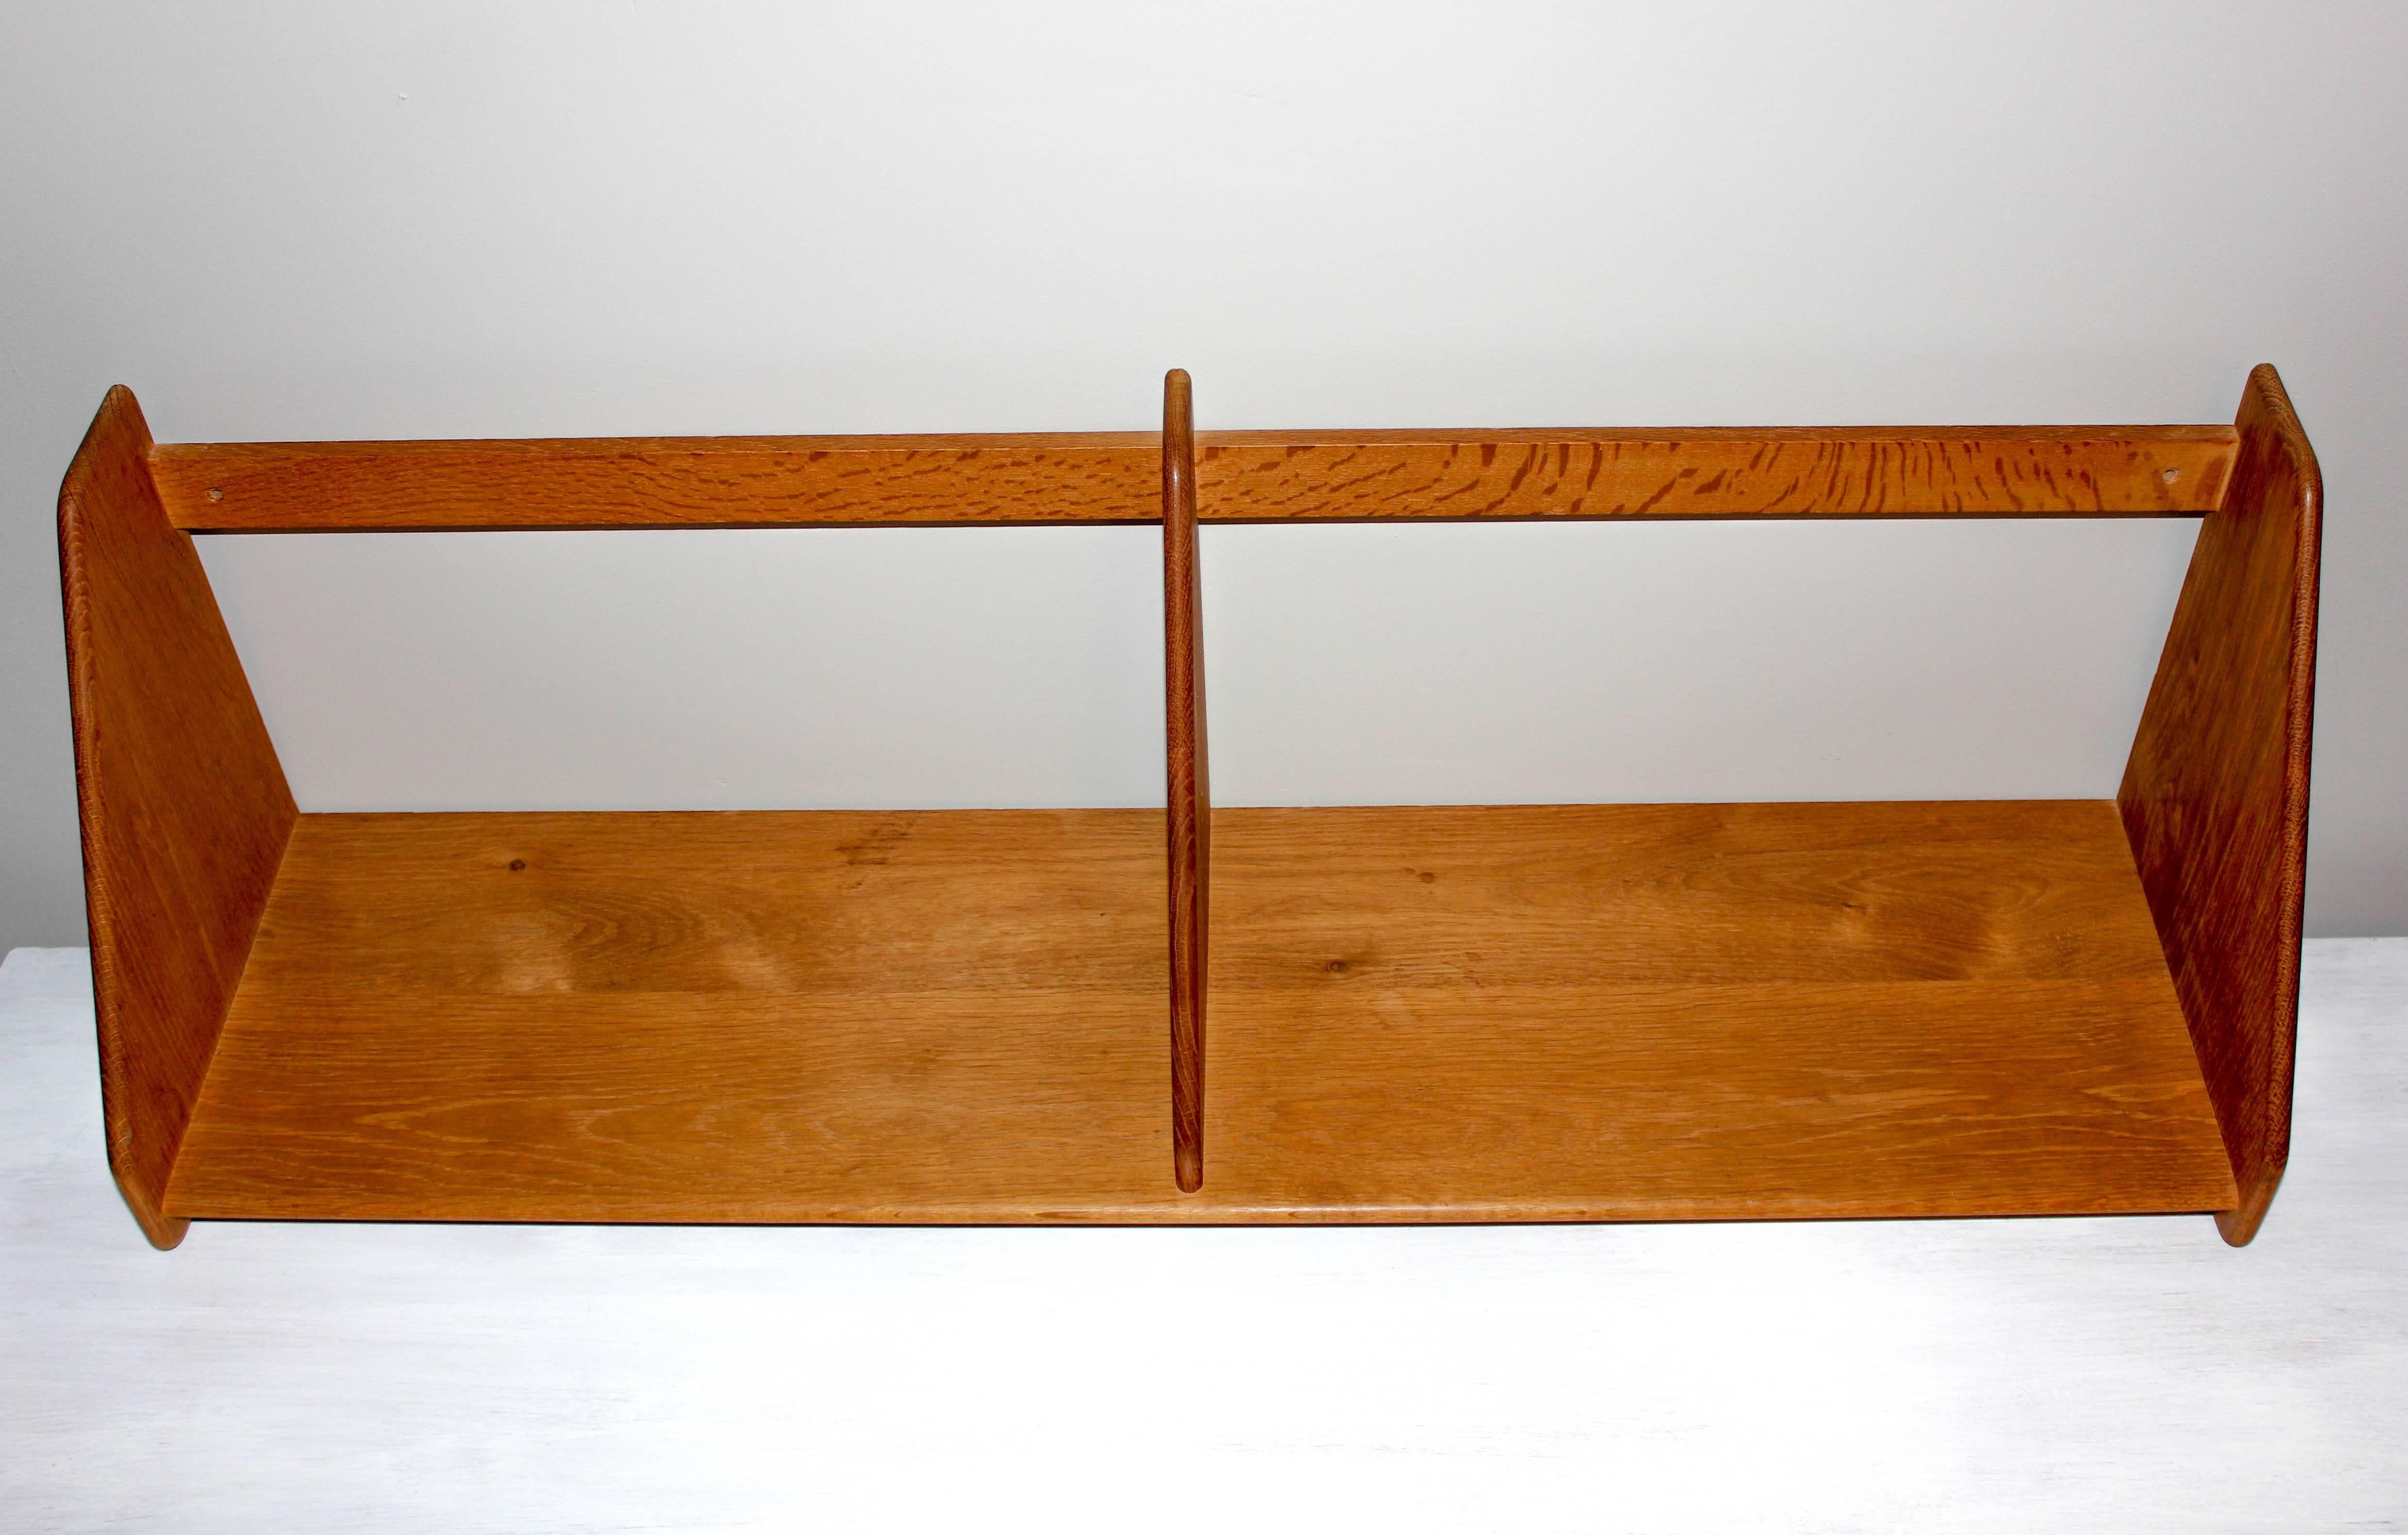 Solid oak wall shelf designed by Hans J Wenger and produced by Ry Møbler during the 1950s. This Classic shelf is mounted straight to the wall. The condition is very good with some minor signs of usage but no structural damages.